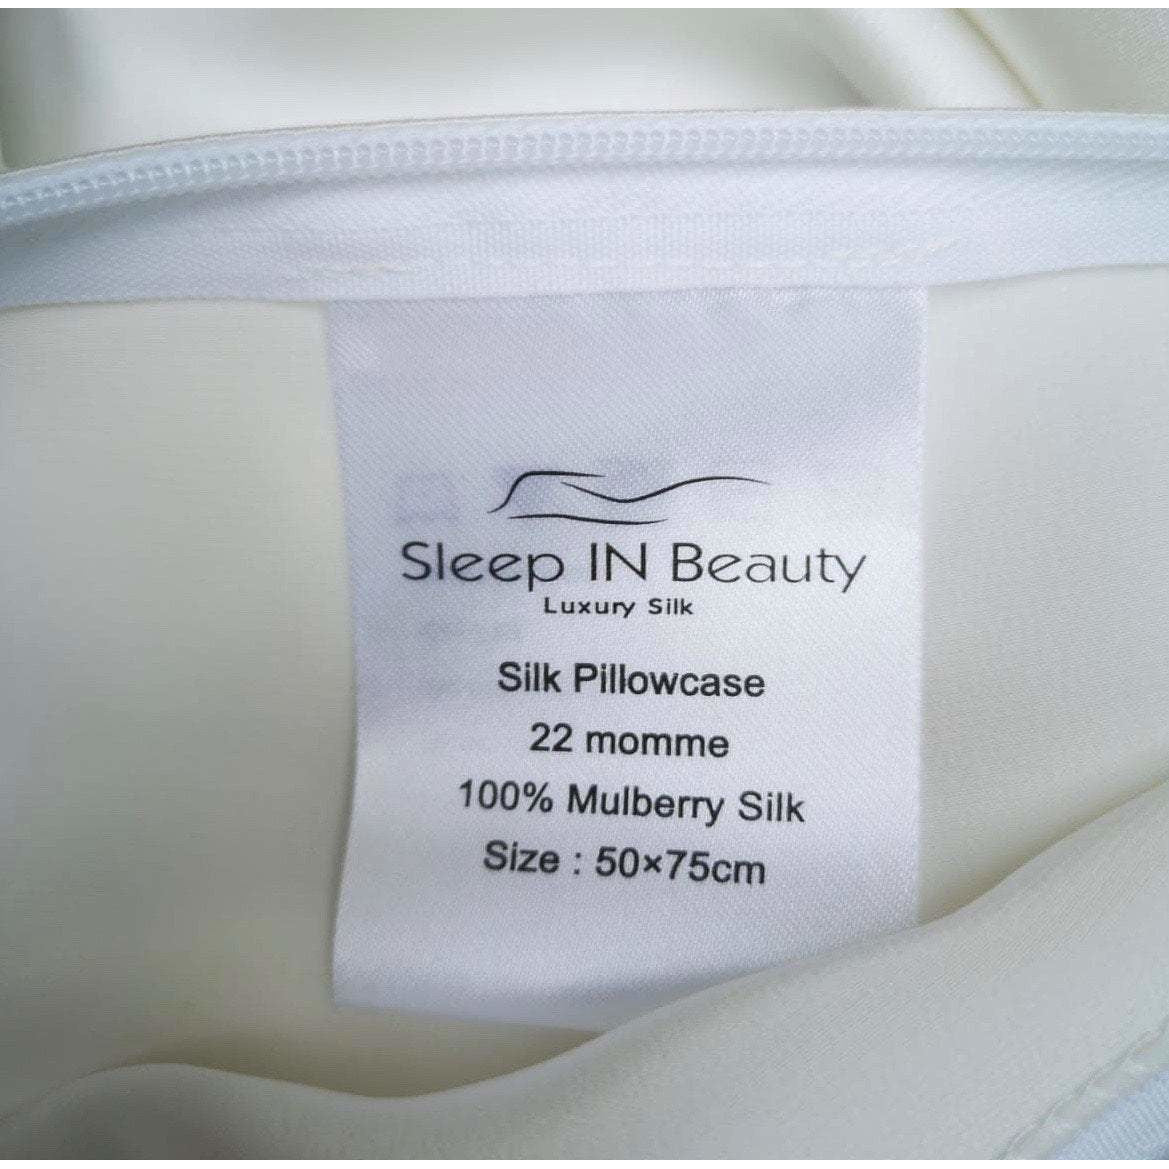 Pair of silk ivory pillowcases 100% Mulberry Silk 22 momme standard size. - Sleep IN Beauty